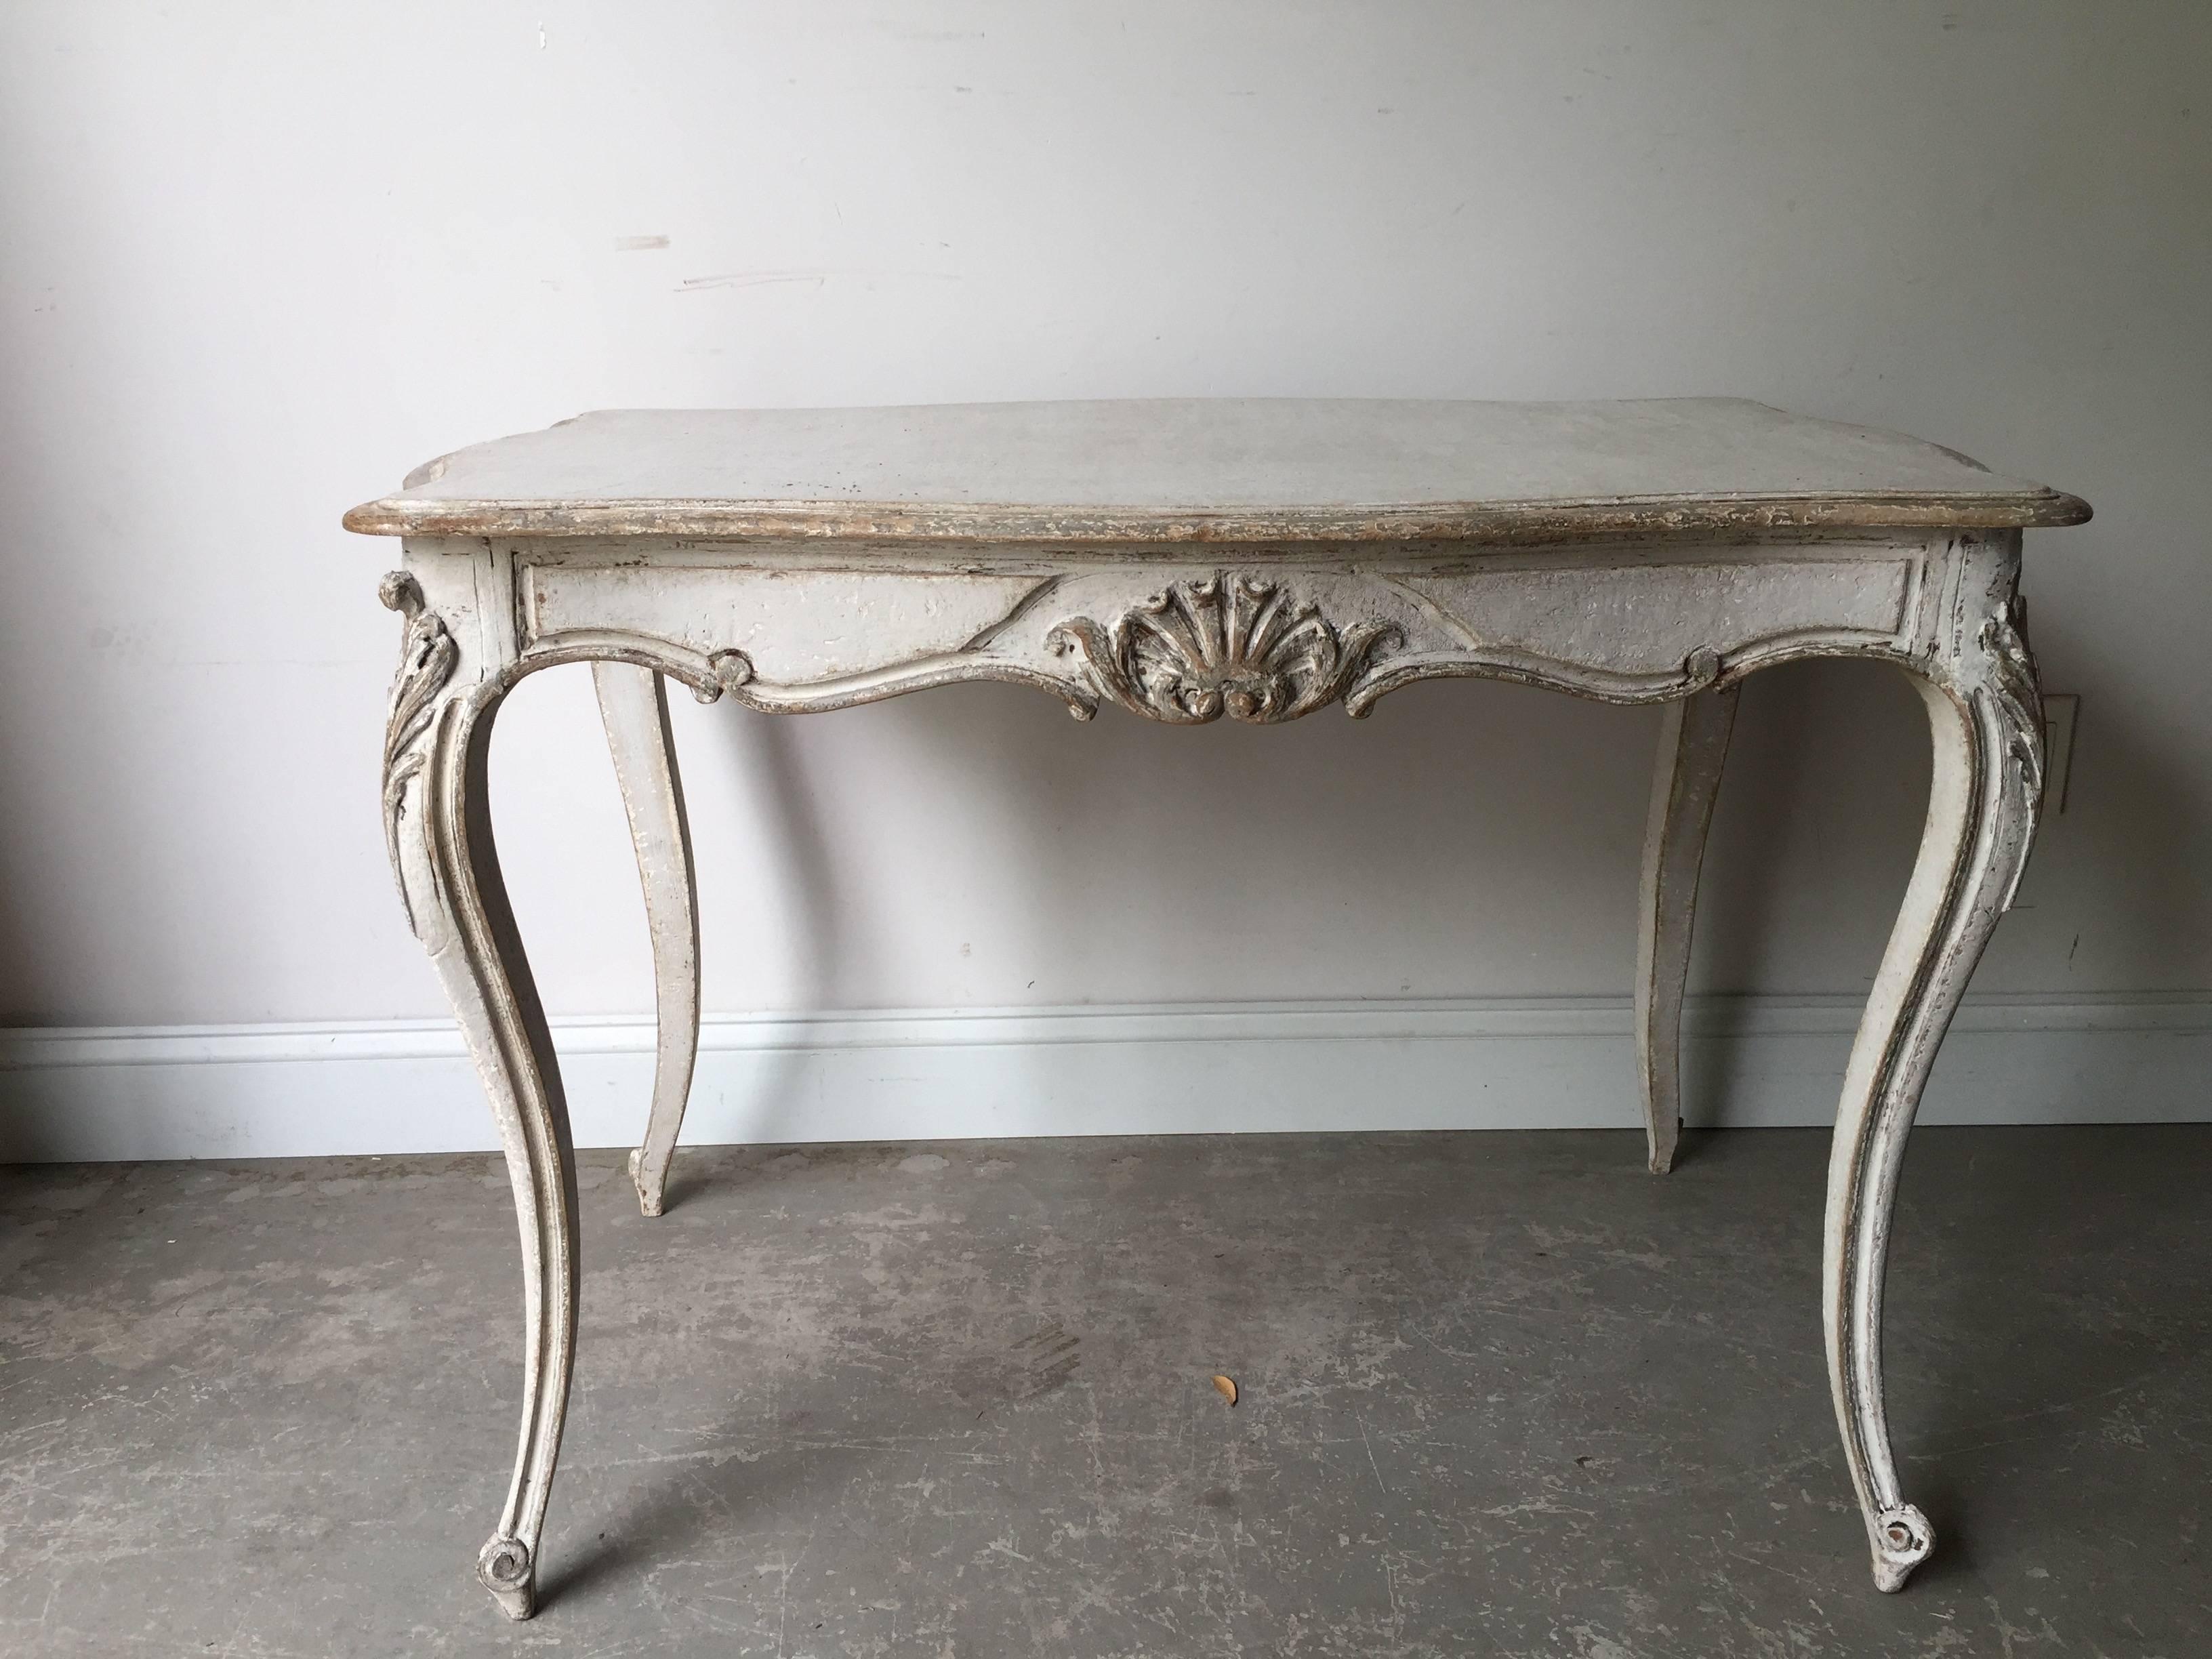 A charming 19th century Louis XV style table/center/desk has slender cabriole legs with carved knees, and a carved flower motif centering sides of shaped apron. One drawer on one side.
Surprising pieces and objects, authentic, decorative and rare